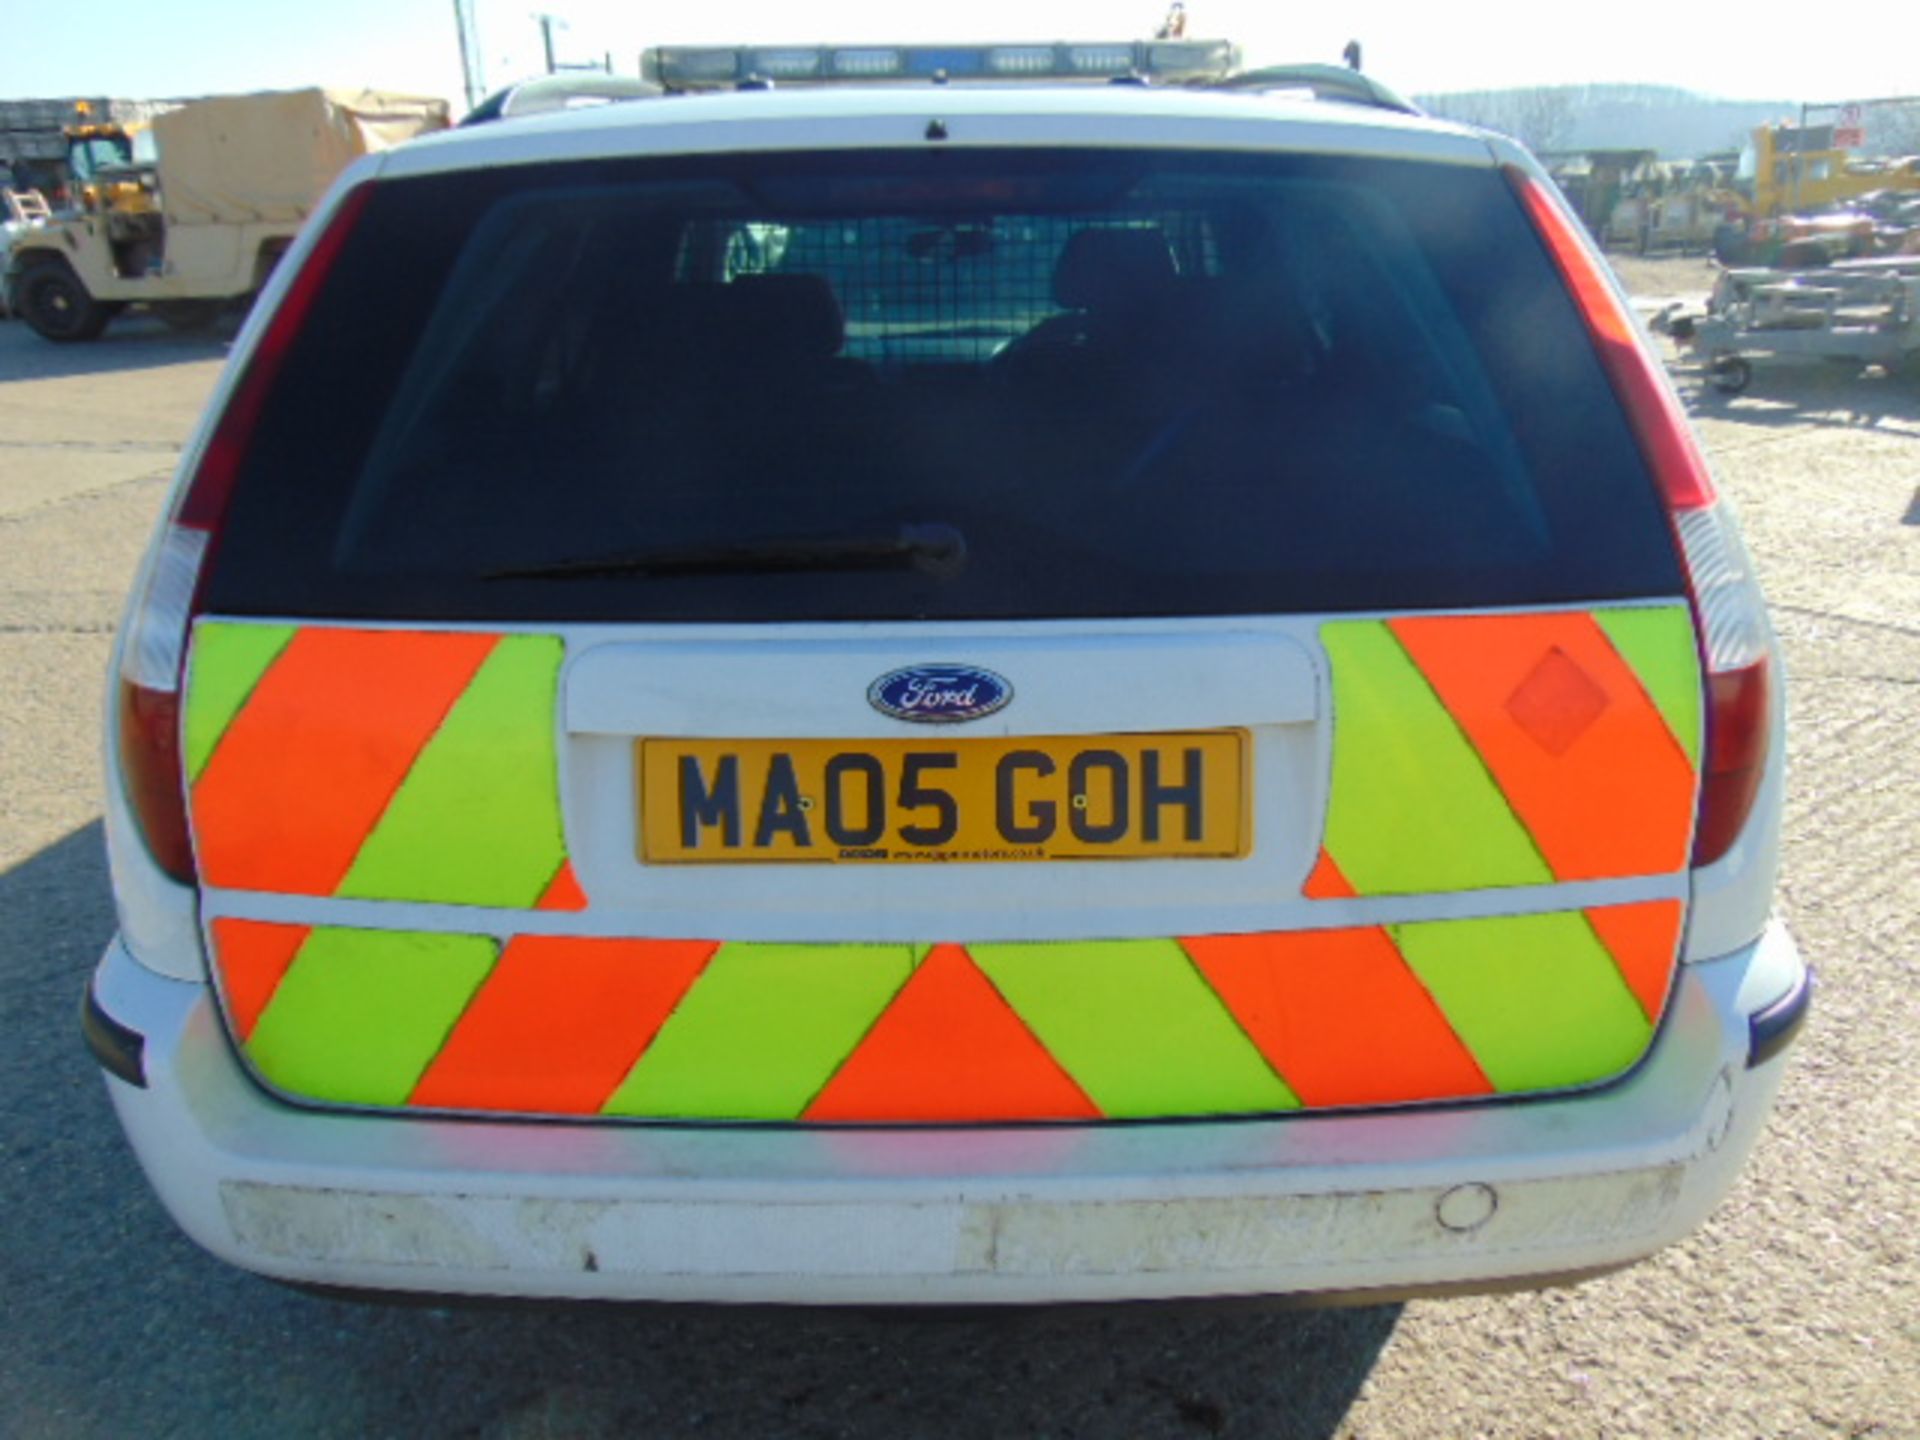 Ford Mondeo 2.0 Turbo diesel ambulance - Image 7 of 14